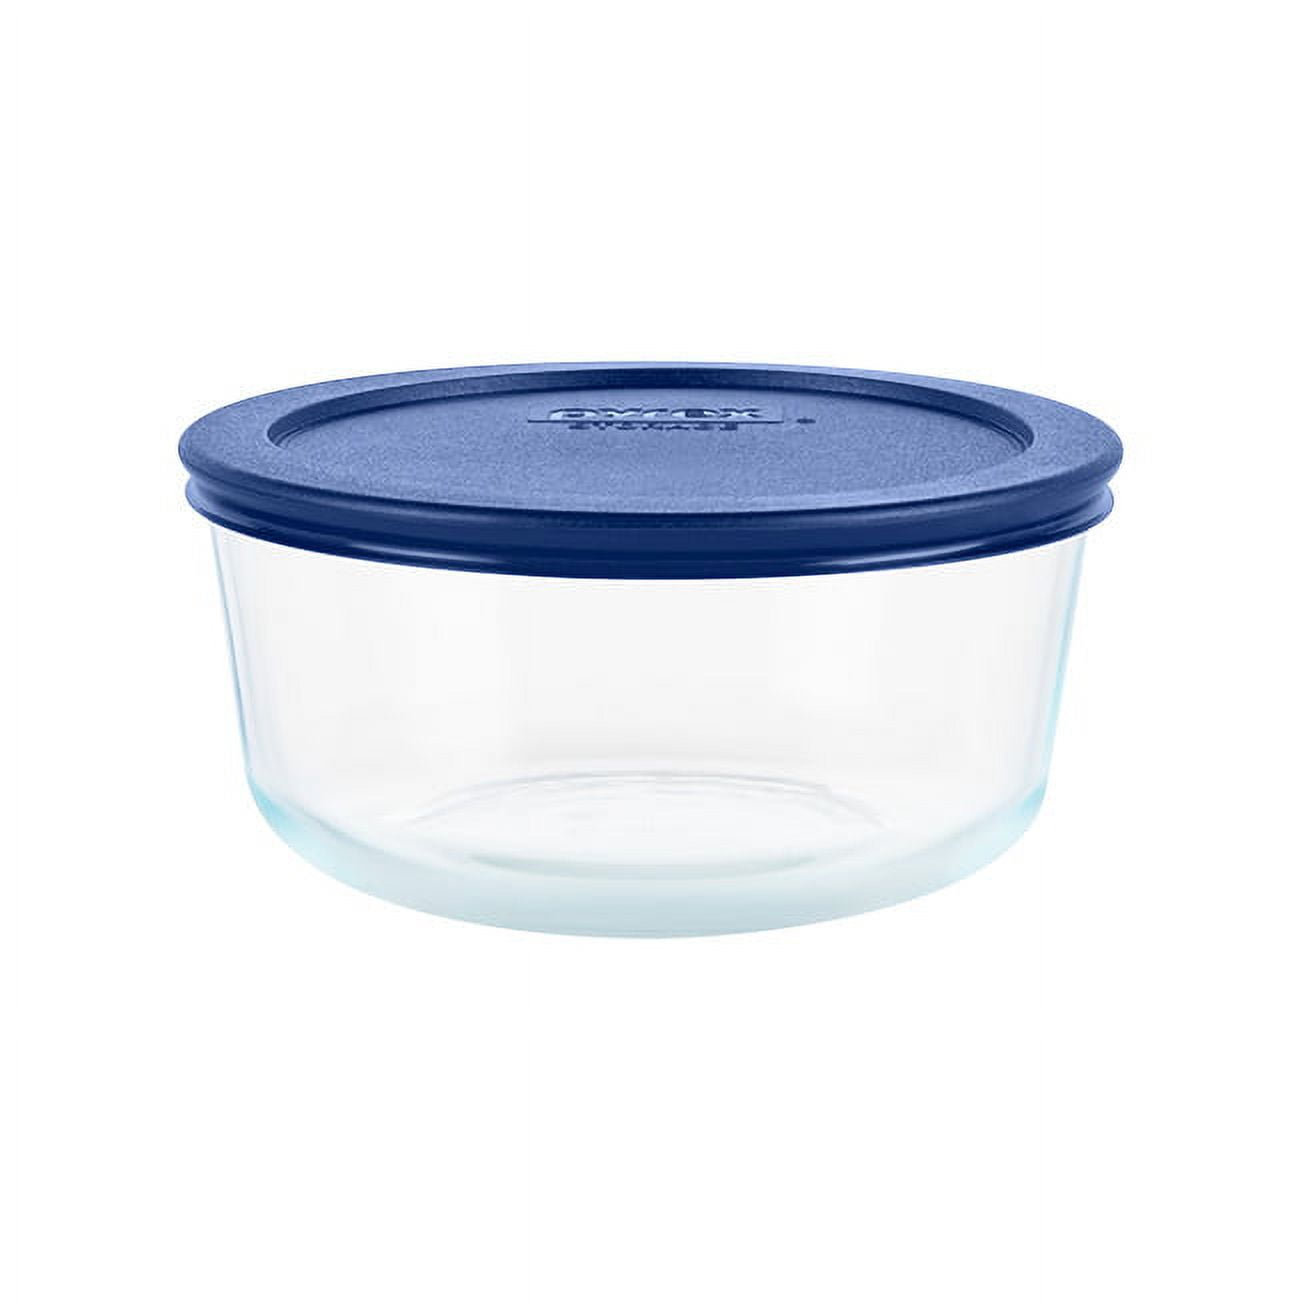 Pyrex 2-Cup Round Glass Storage Set with Dark Blue Plastic Cover